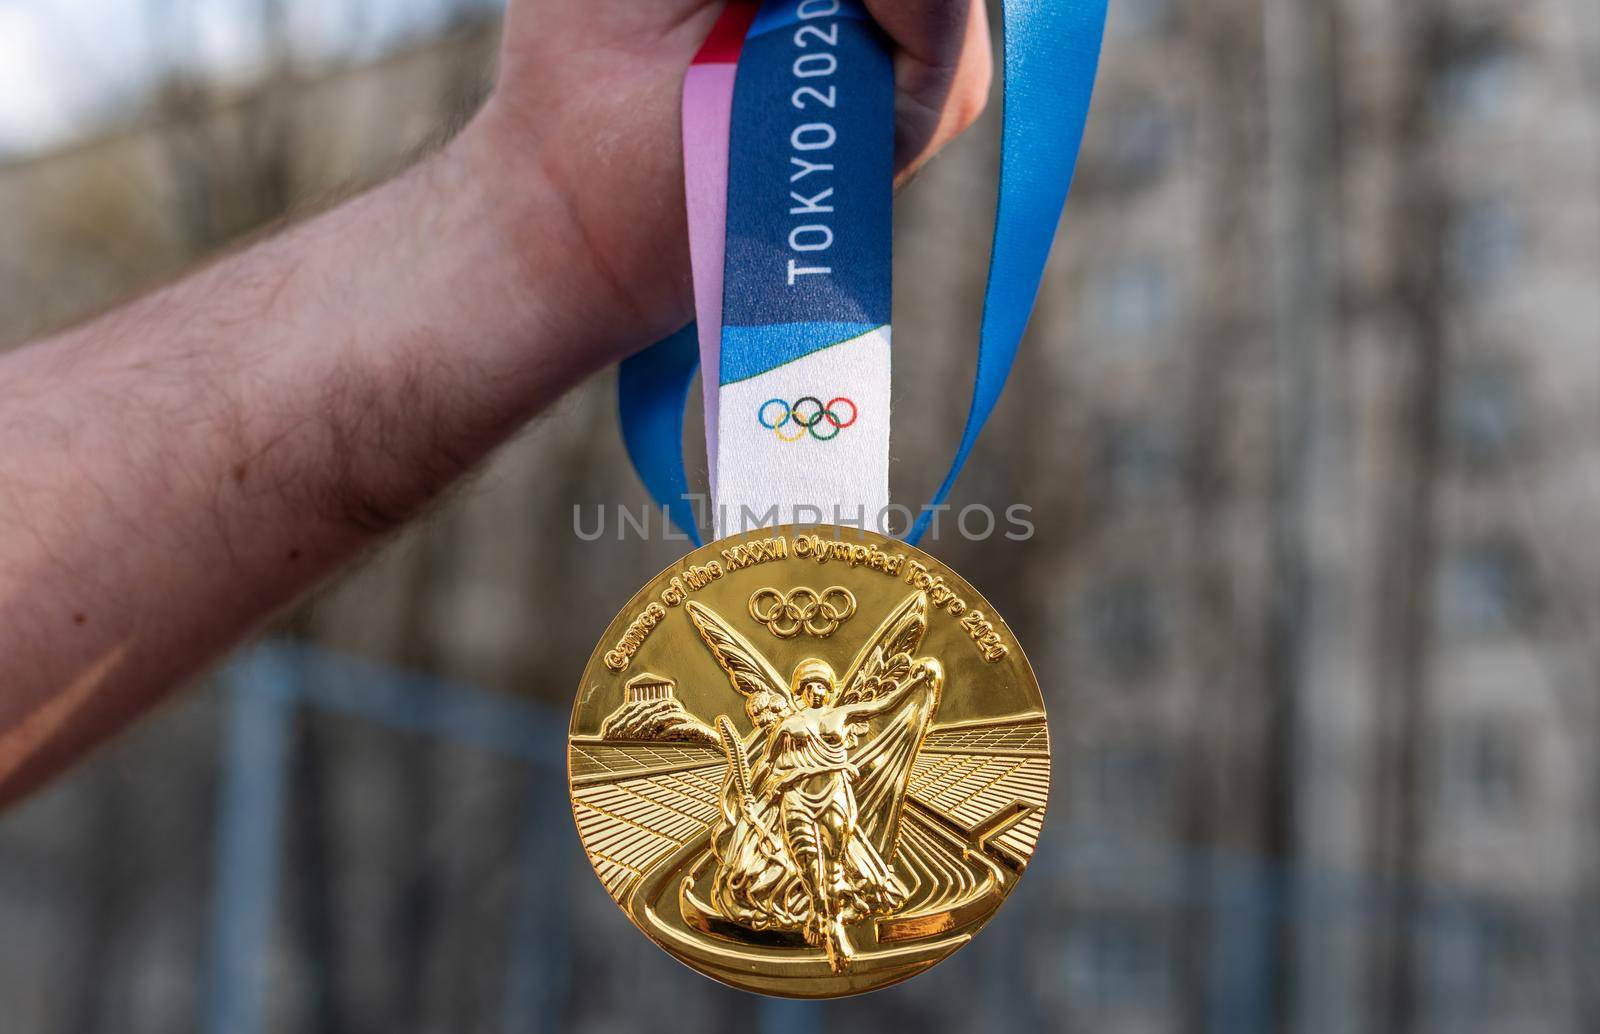 April 17, 2021 Tokyo, Japan. The gold medal of the XXXII Summer Olympic Games in Tokyo in the hand of an athlete.